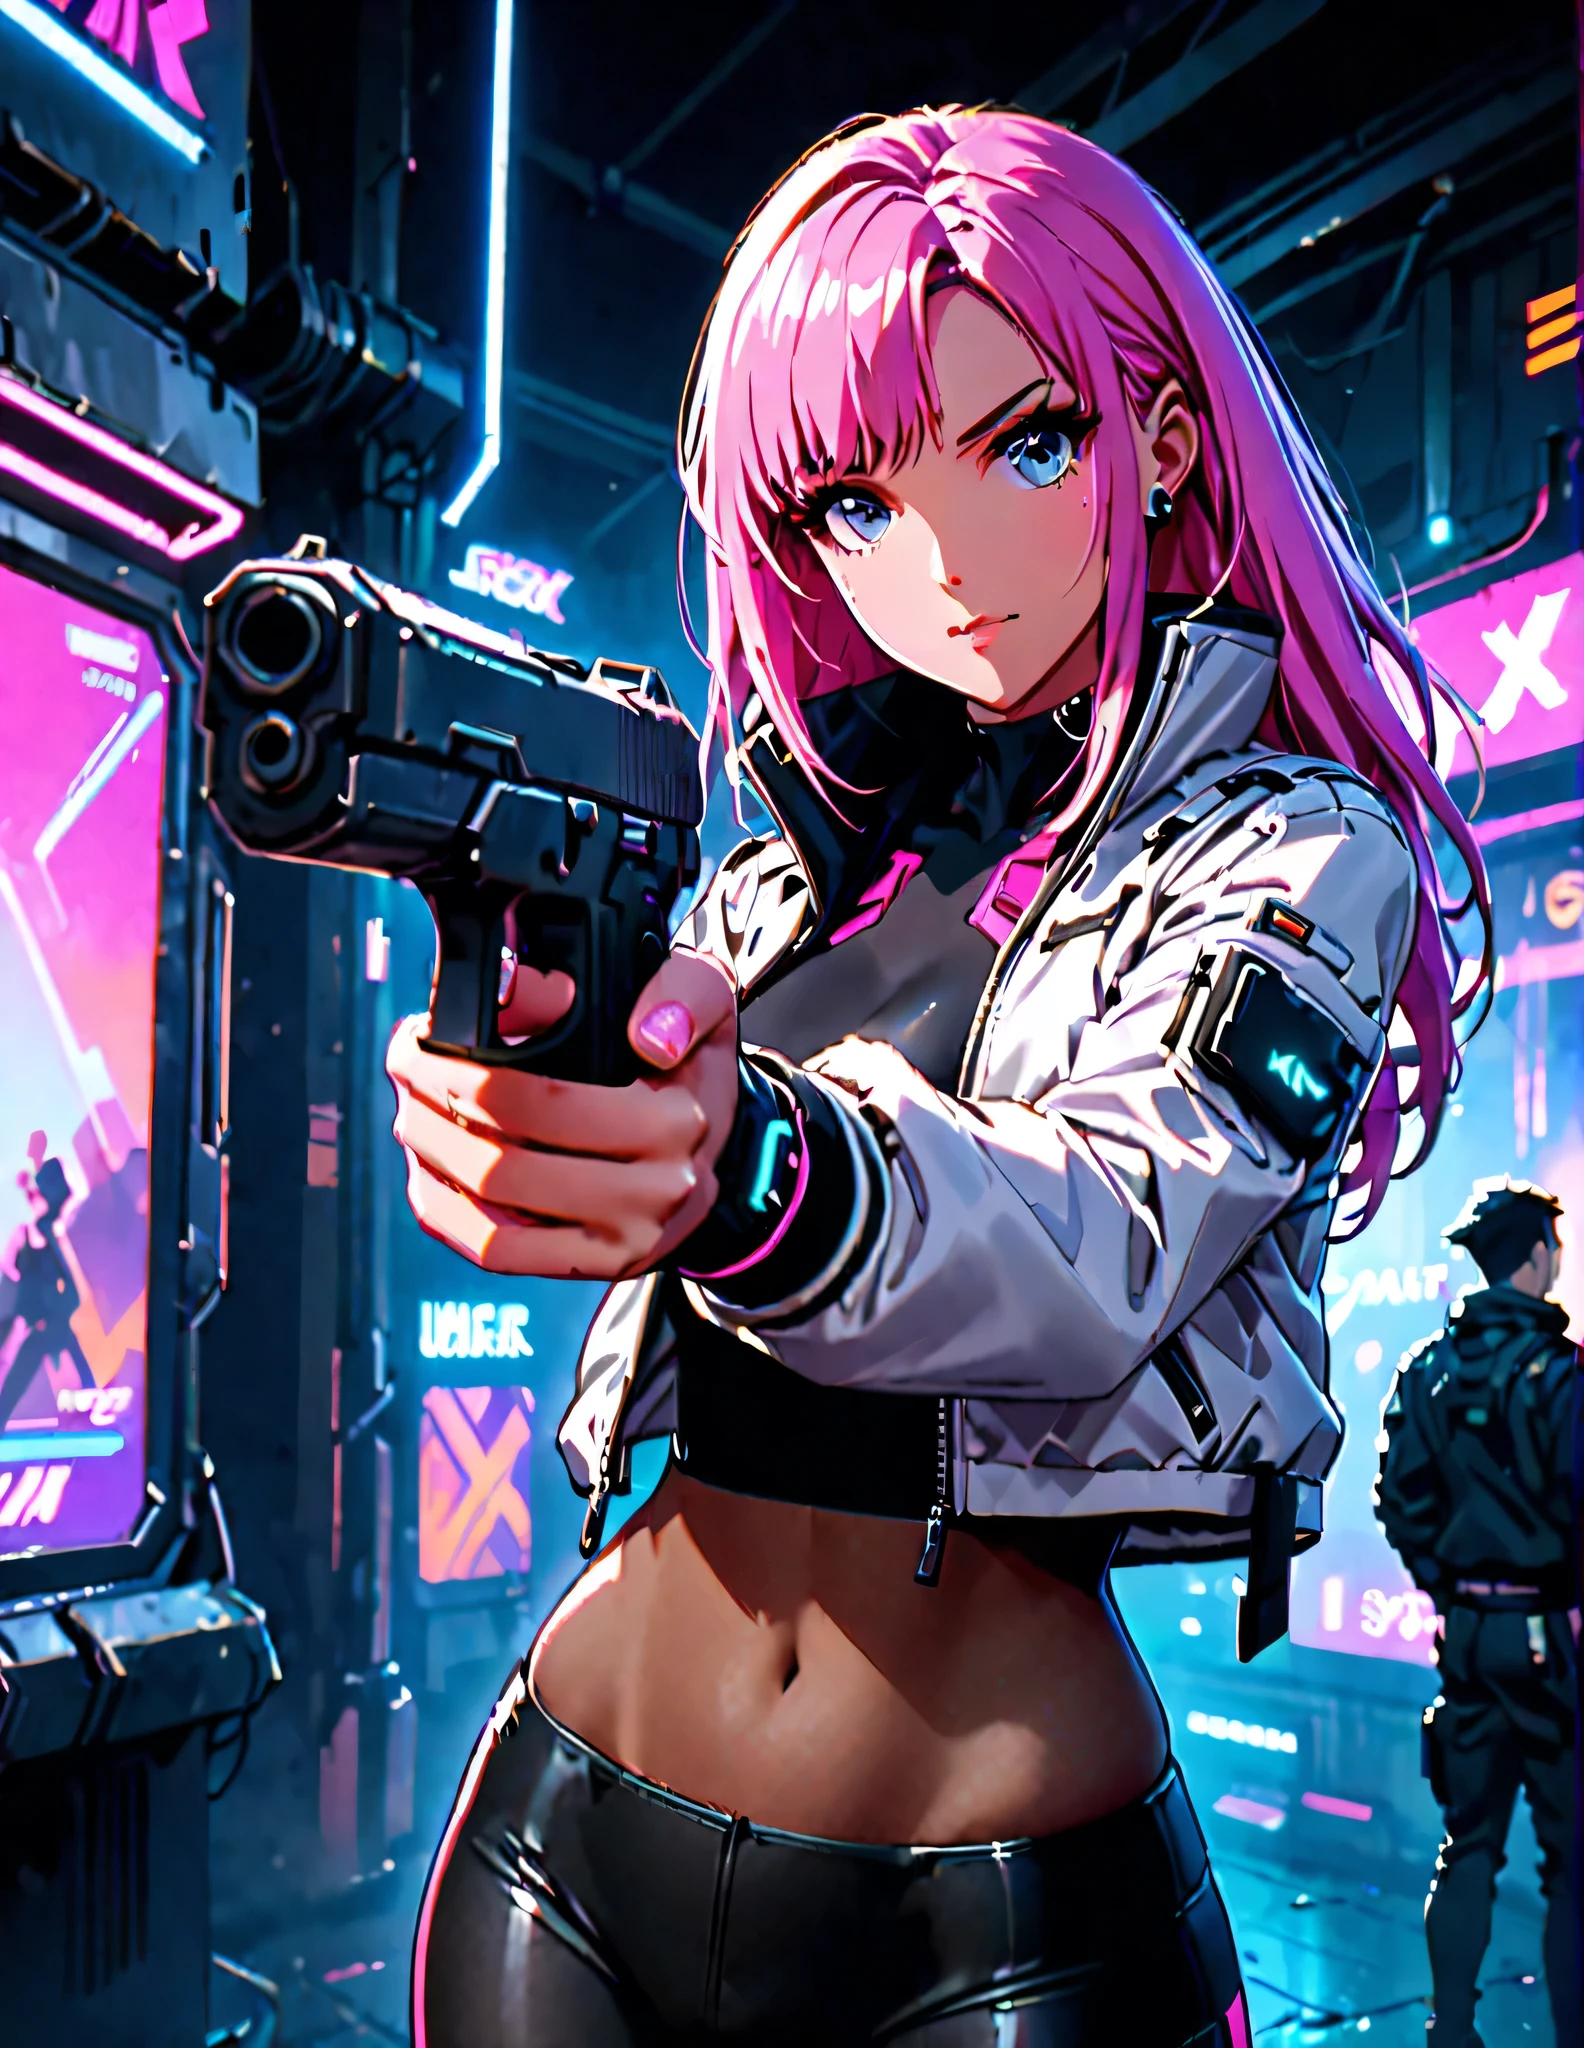 (best quality,high quality,1girl,lovely,cute,white jacket,solo focus,grey eyes,beautiful detailed eyes,beautiful detailed face,perfect hands,complete fingers,perfect anatomy,perfect proportions,ultra long pink hair,detailed shadows,detailed,cyberpunk,neon),solo beautiful girl in a white jacket with grey eyes and ultra long pink hair. Her face is beautifully detailed with perfect proportions and anatomy. She has lovely and beautiful detailed eyes that shine with a serious expression. Her hands are perfect, with complete fingers. The lighting casts detailed shadows on her face. She stands in a solo focus, aiming a pistol at the viewer, adding a touch of intensity. She wears skintight black leggings or full black pantyhose that match her black boots. The entire composition is captured in a cowboy shot, emphasizing her powerful presence. The scene has a cyberpunk atmosphere with neon lights, adding a futuristic and dynamic element to the overall composition. The image is of the highest quality, with a highly detailed and realistic rendering.